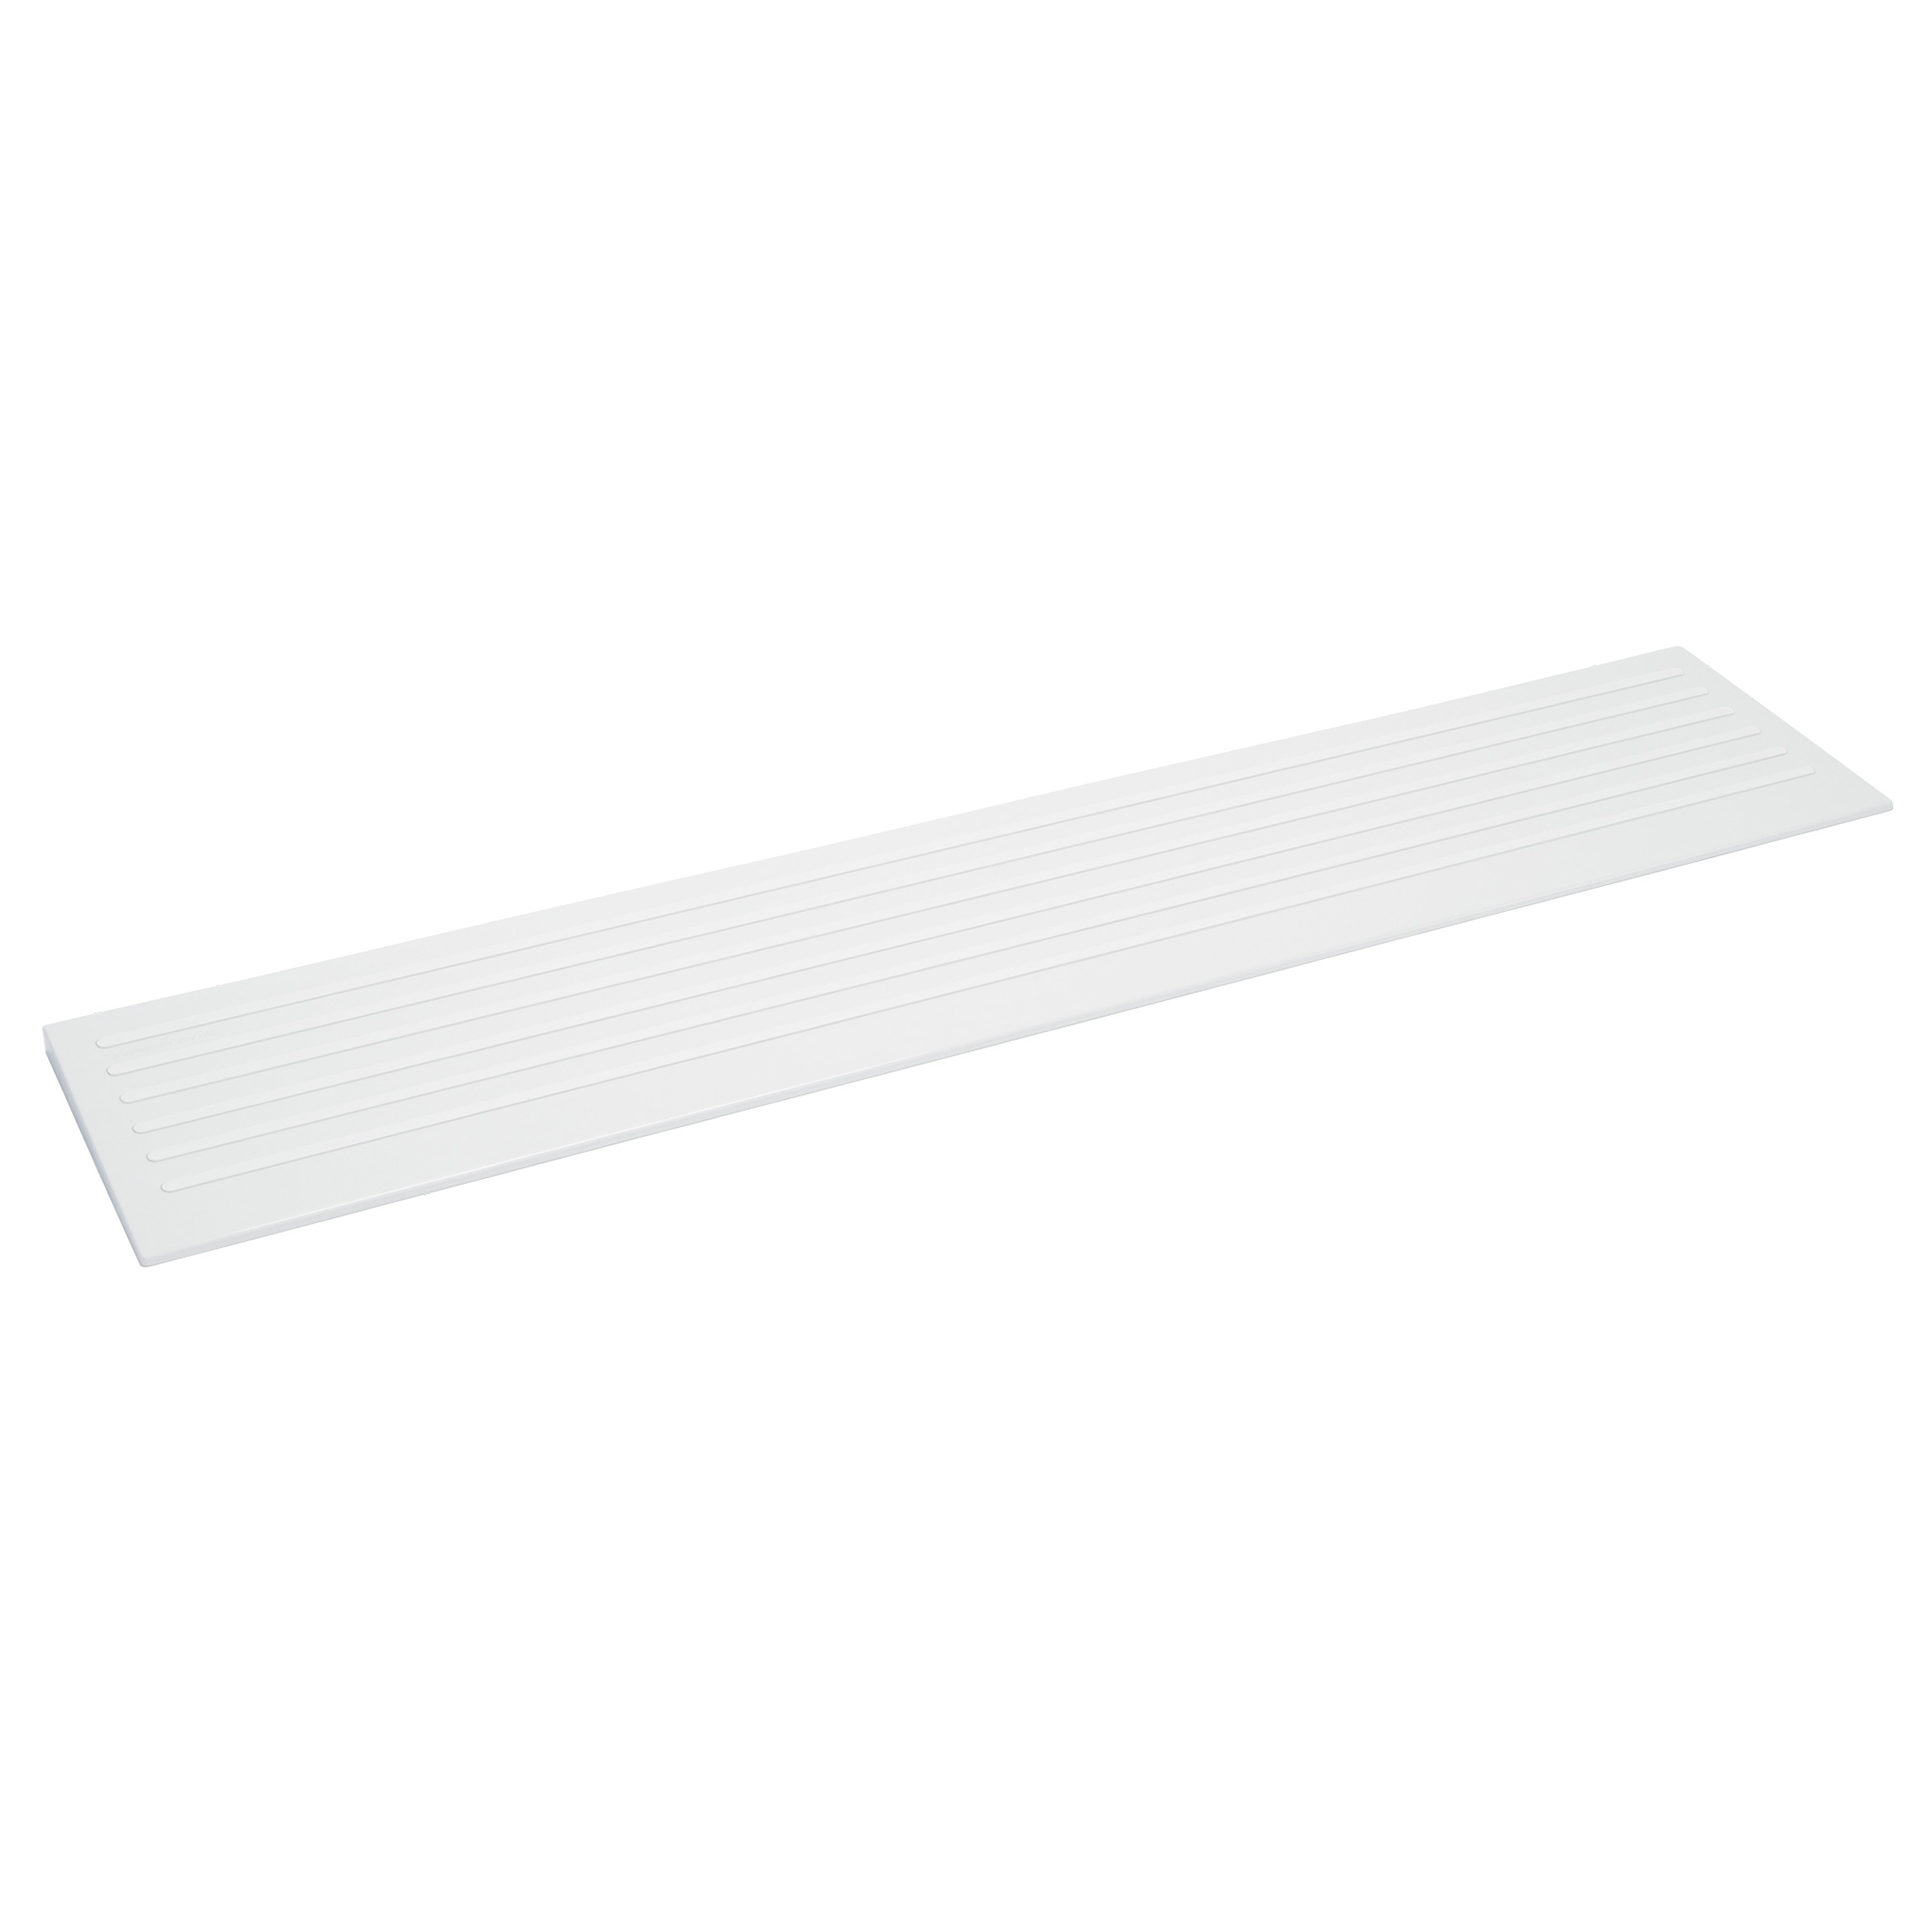 CareGiver 60x12x7/8" Barrier-Free Entry Ramp in White